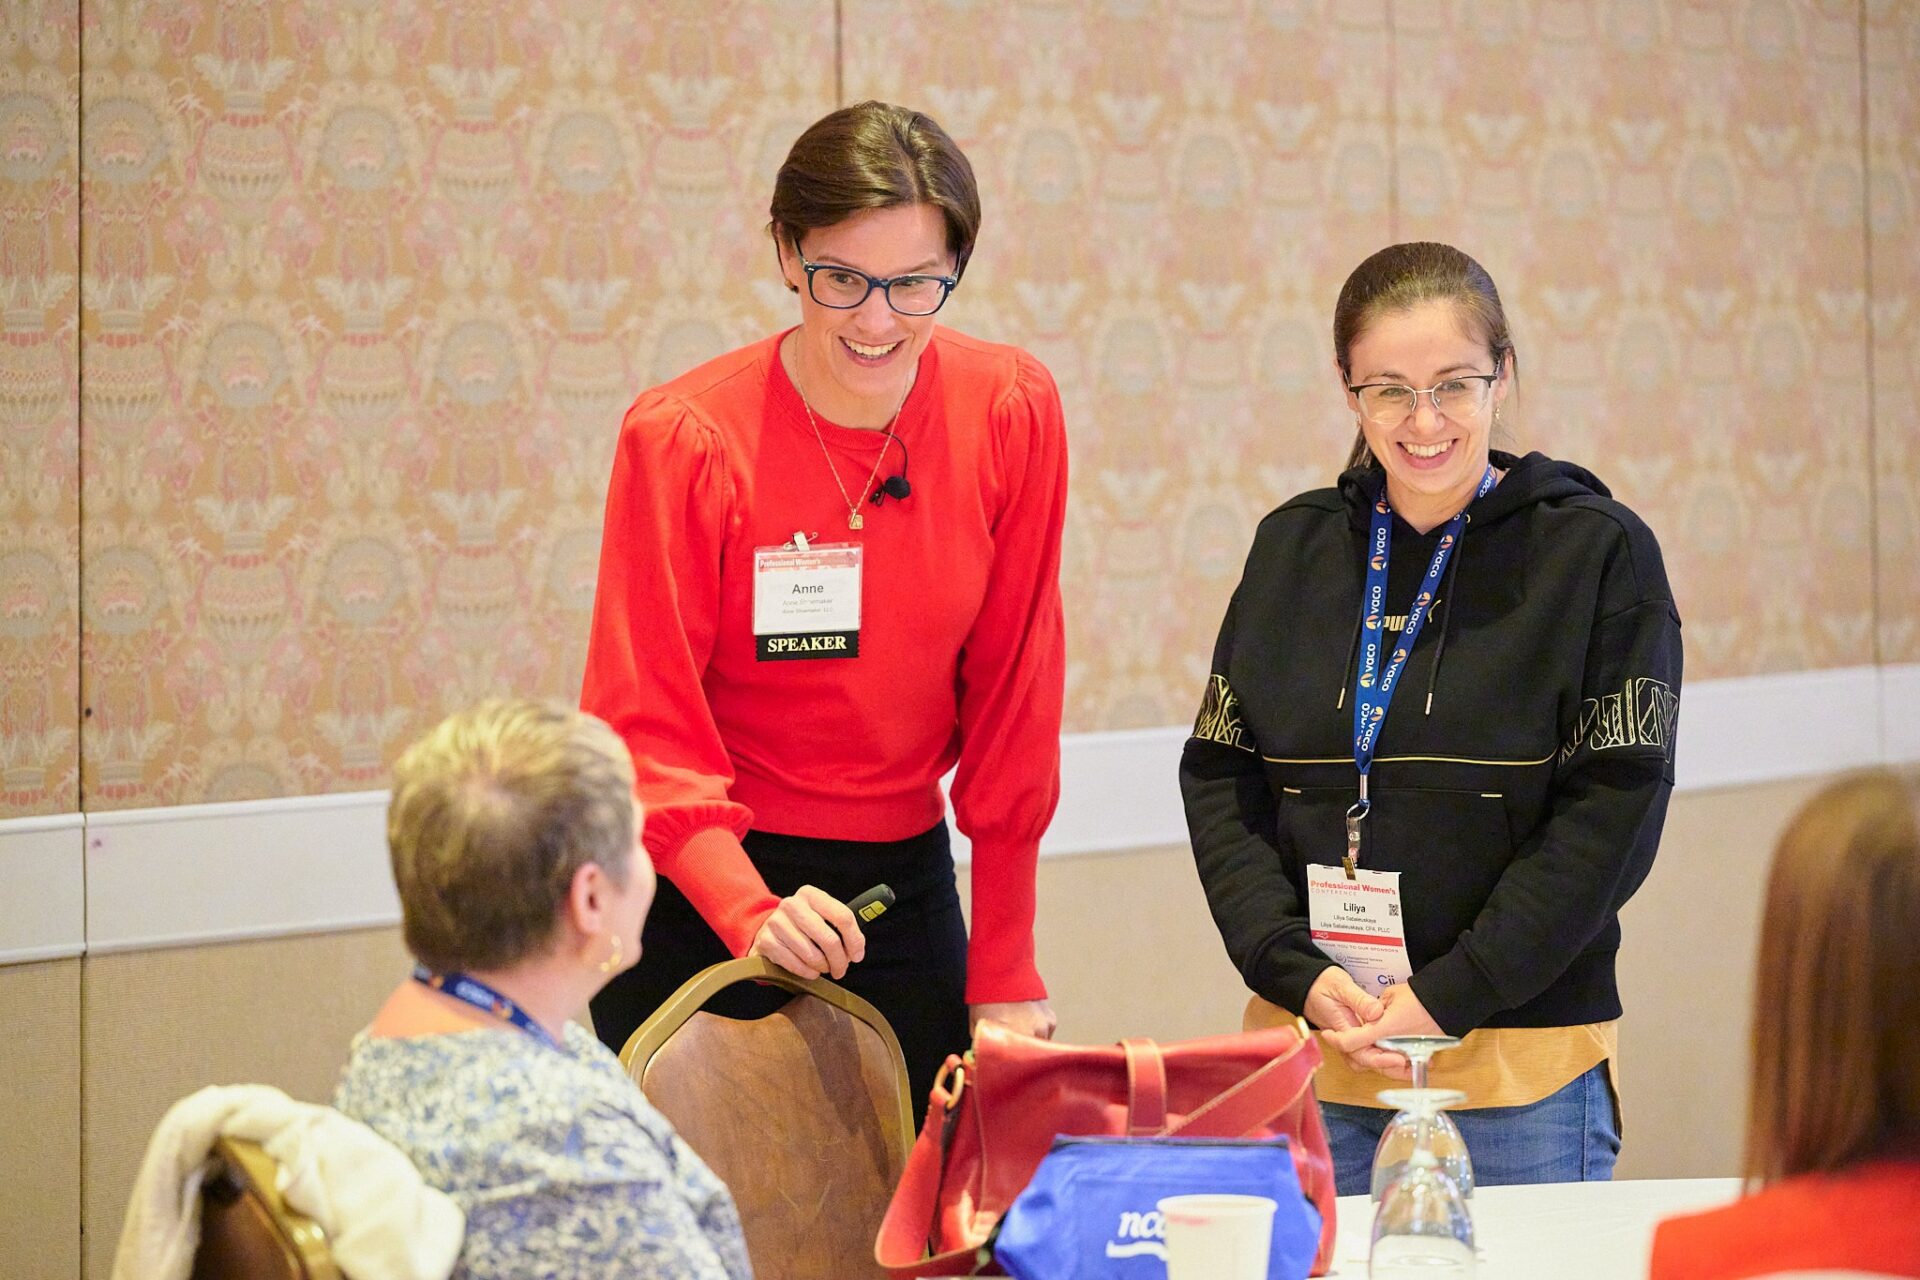 Anne Shoemaker in a red sweater participating in an interactive workshop activity.